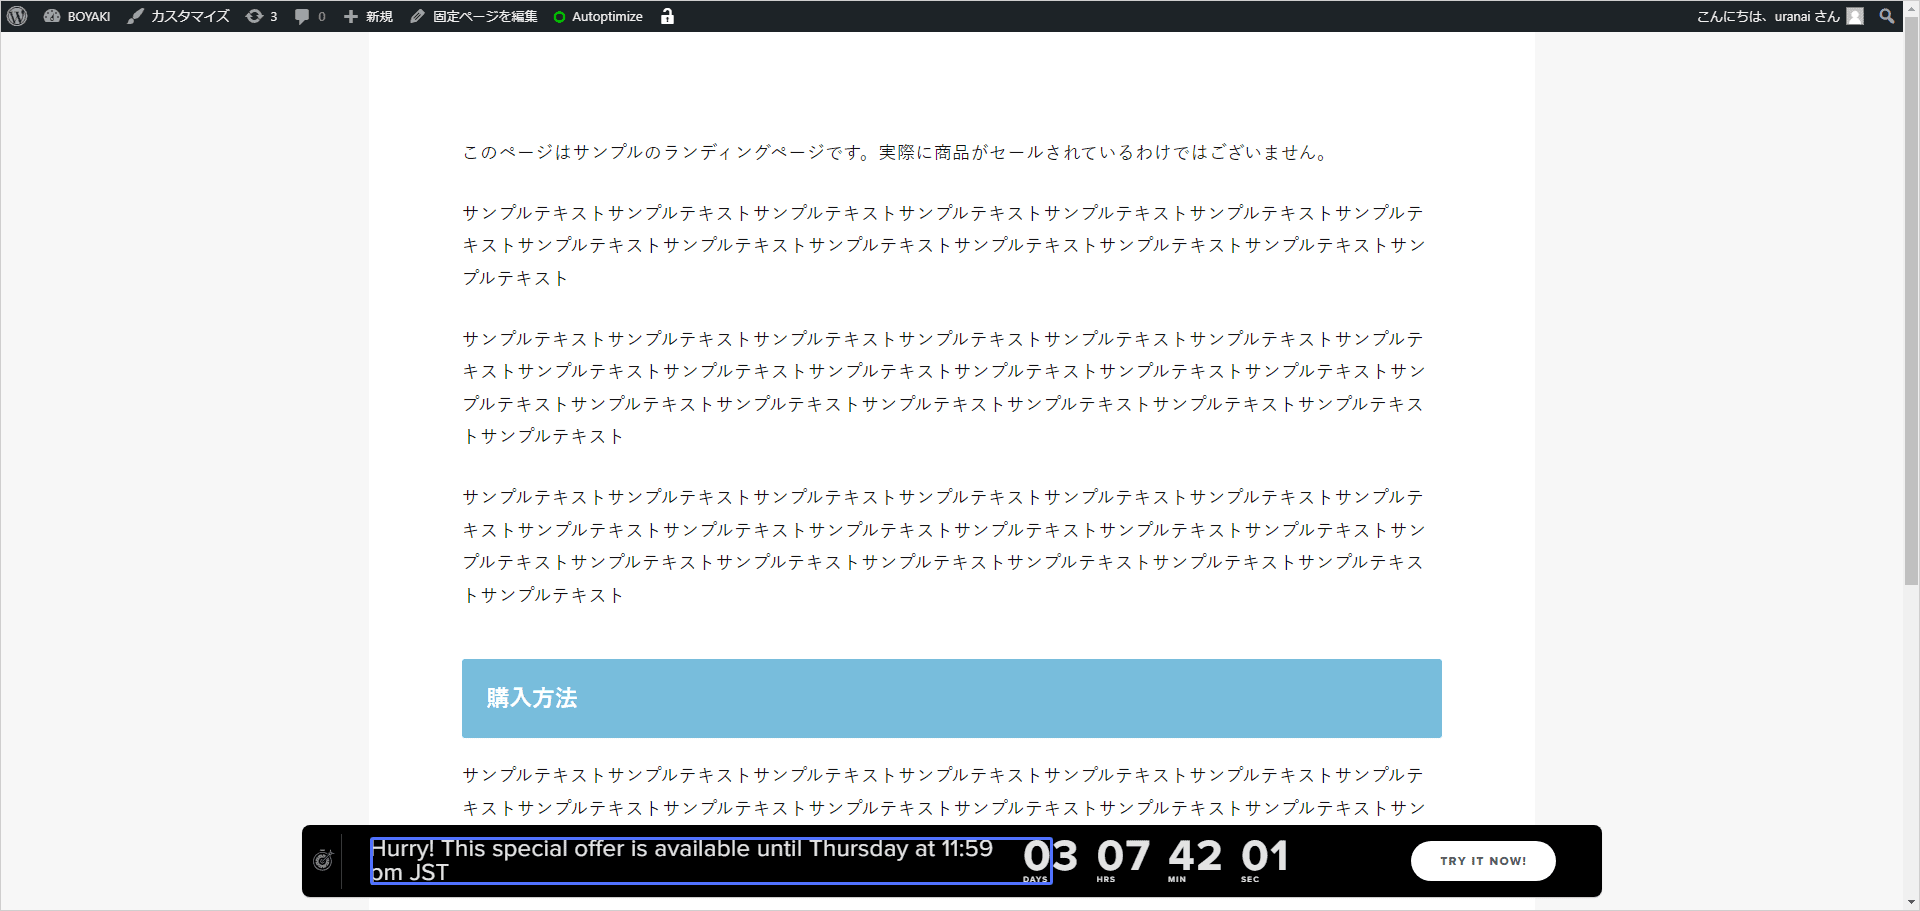 Deadline Funnel countdown timer and text are displayed within the fixed page.